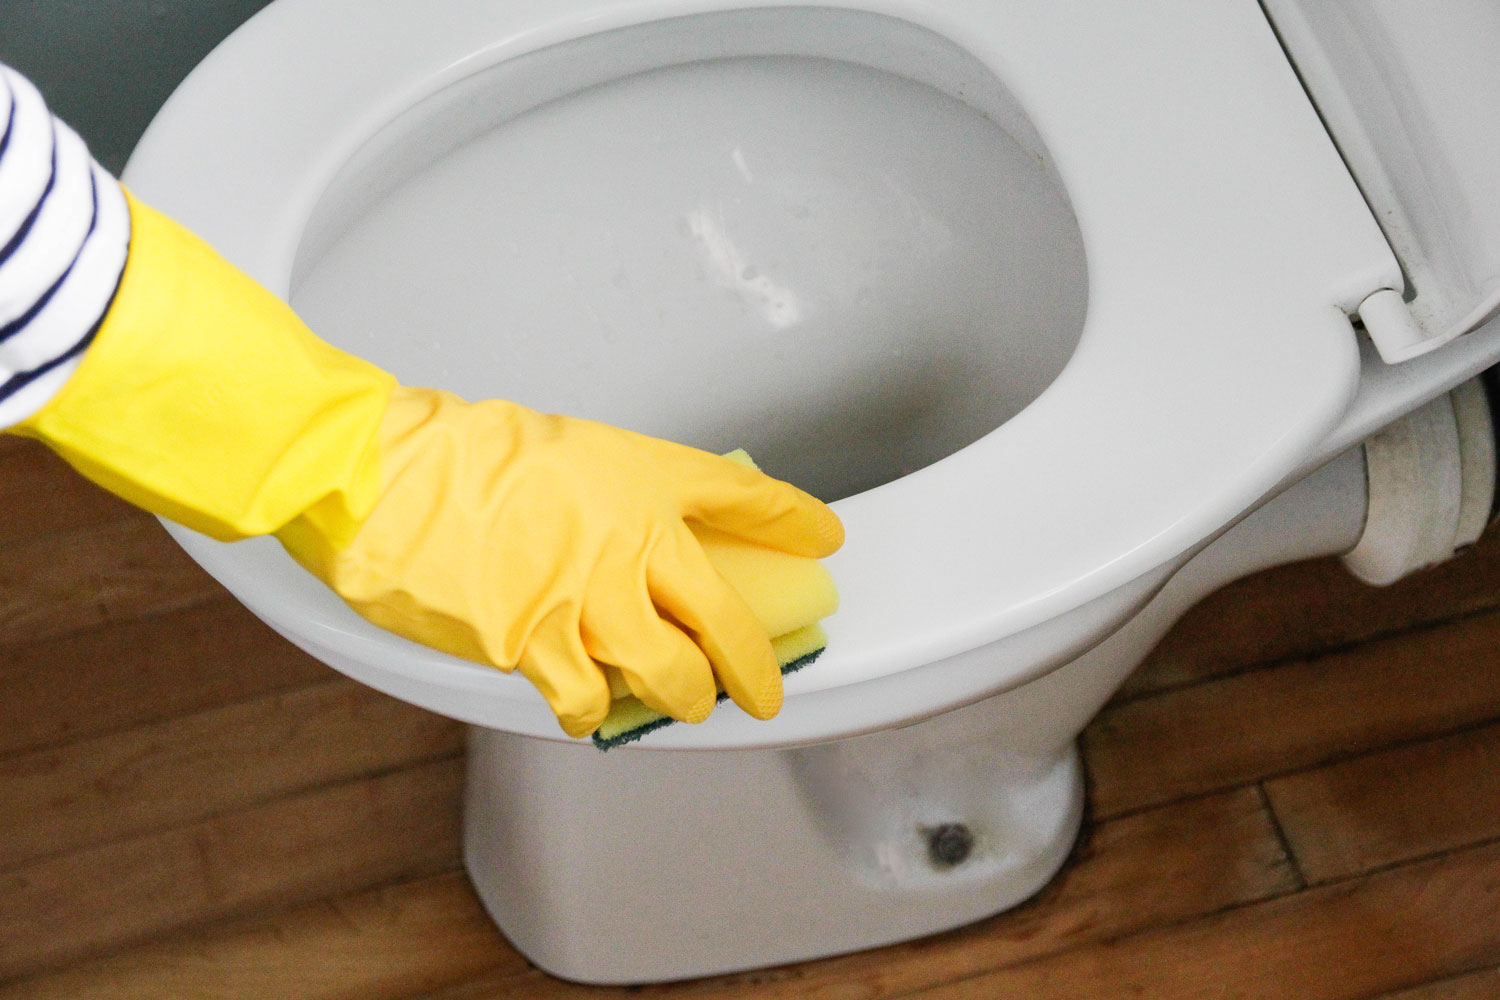 http://www.bhg.com.au/media/51420/cleaning-toilet-stains.jpg